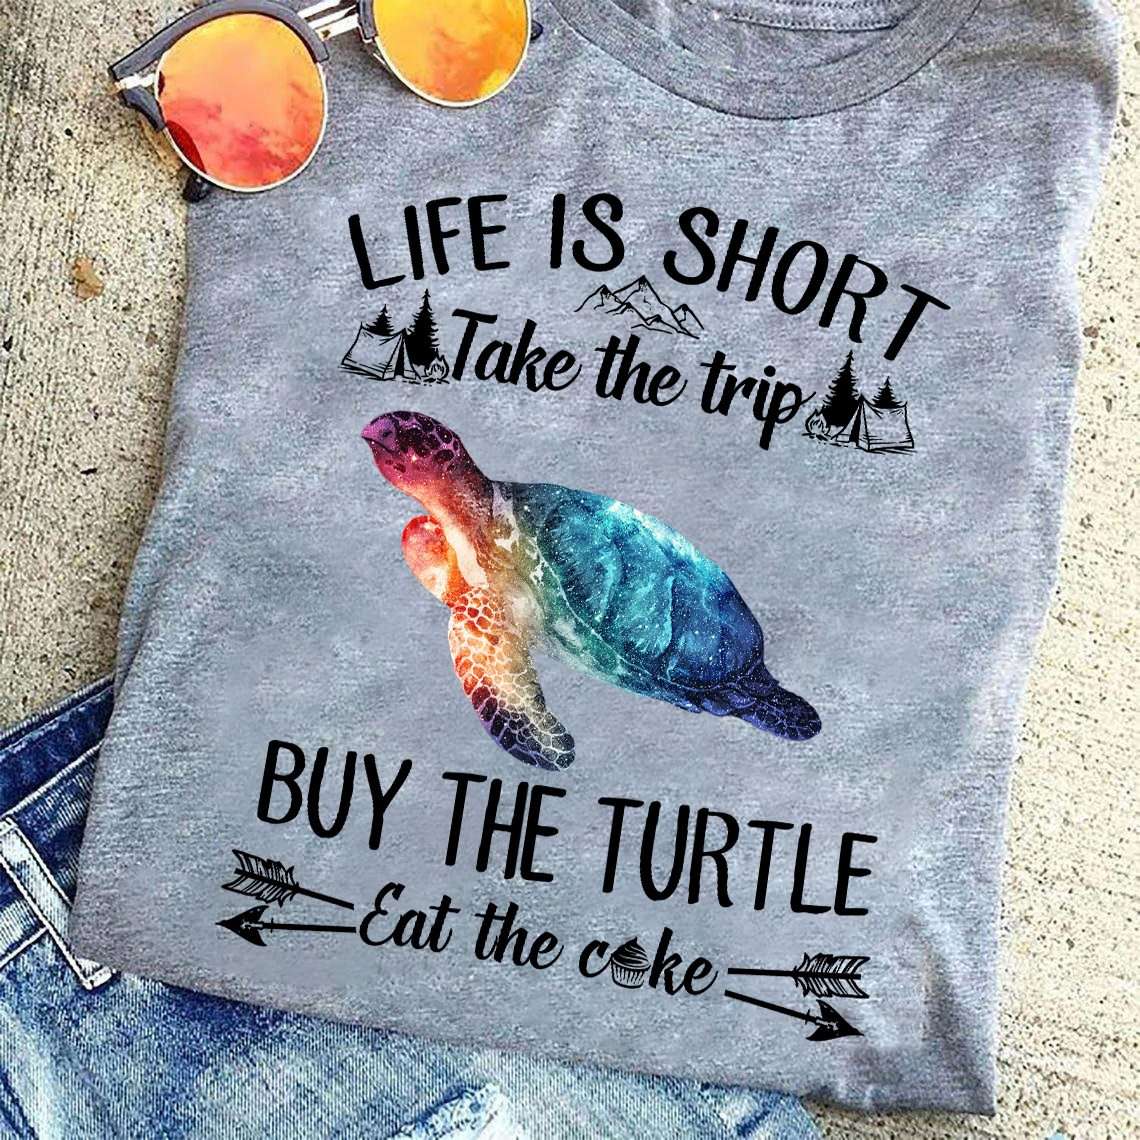 The Turtle - Life is short take the trip buy the turtle eat the cake